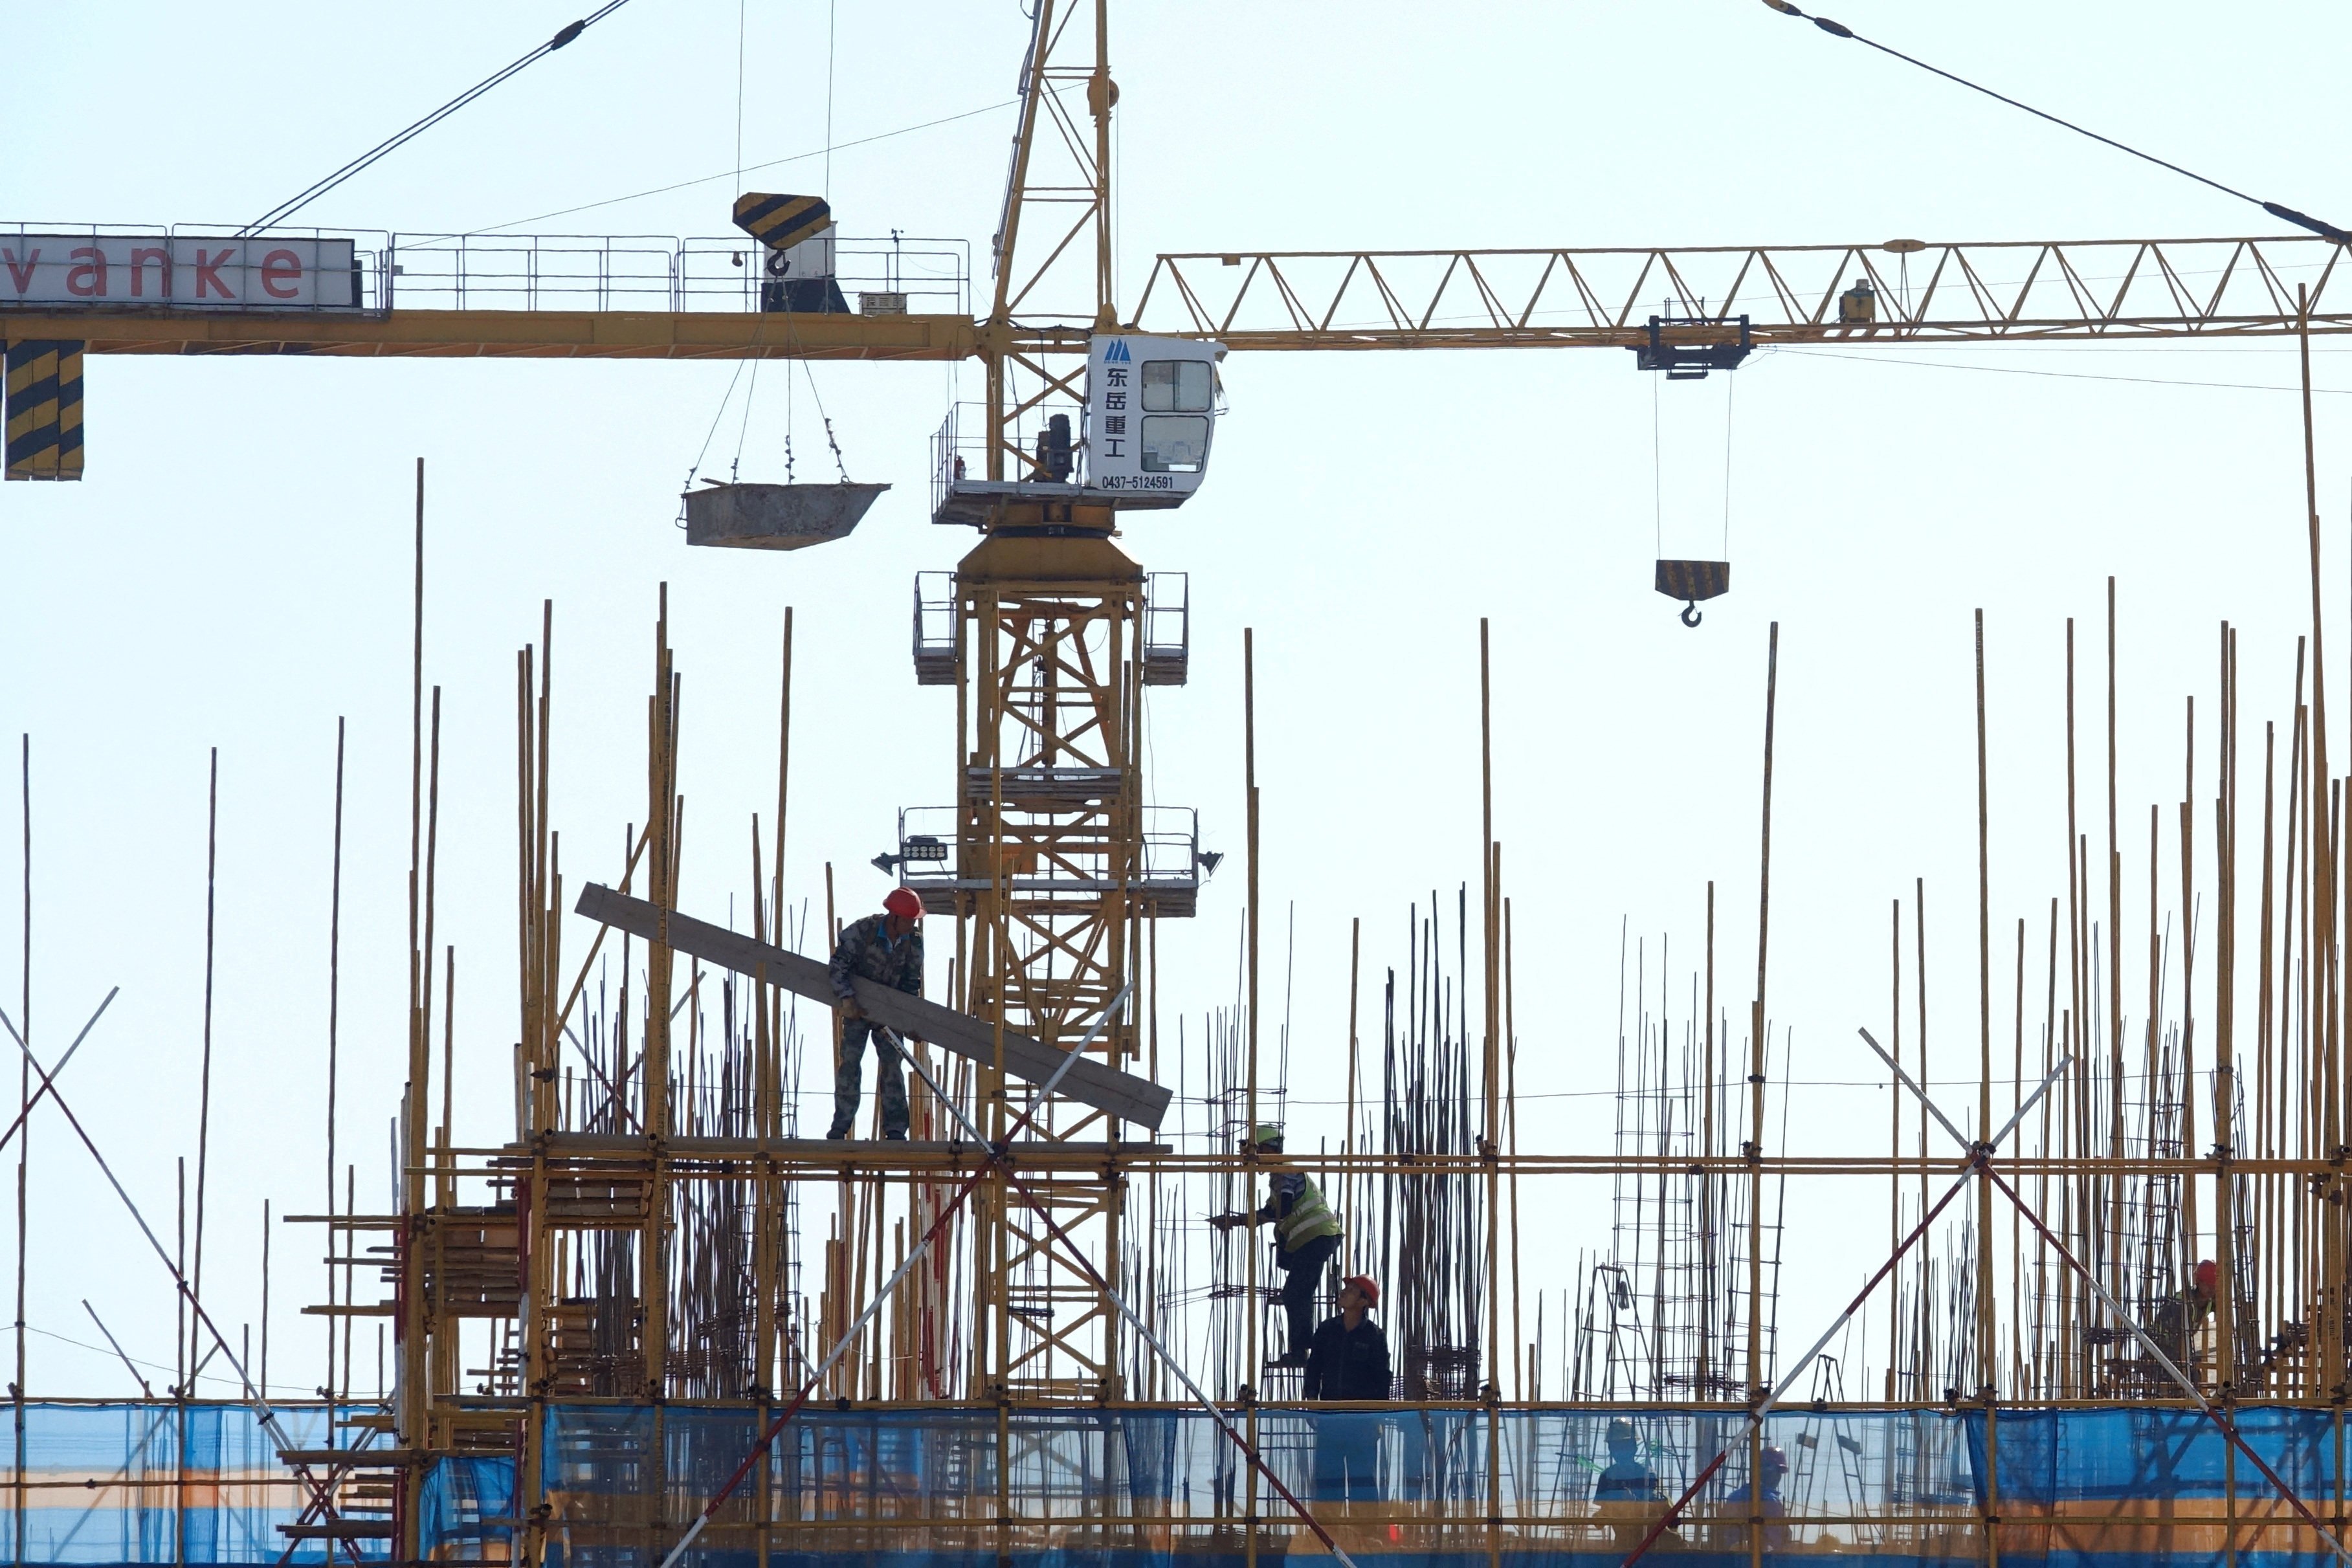 A Vanke sign is at a residential construction site in Dalian, Liaoning province. Chinese banks have offered credit support for struggling developers such as Vanke to revive the stricken property sector. Photo: Reuters